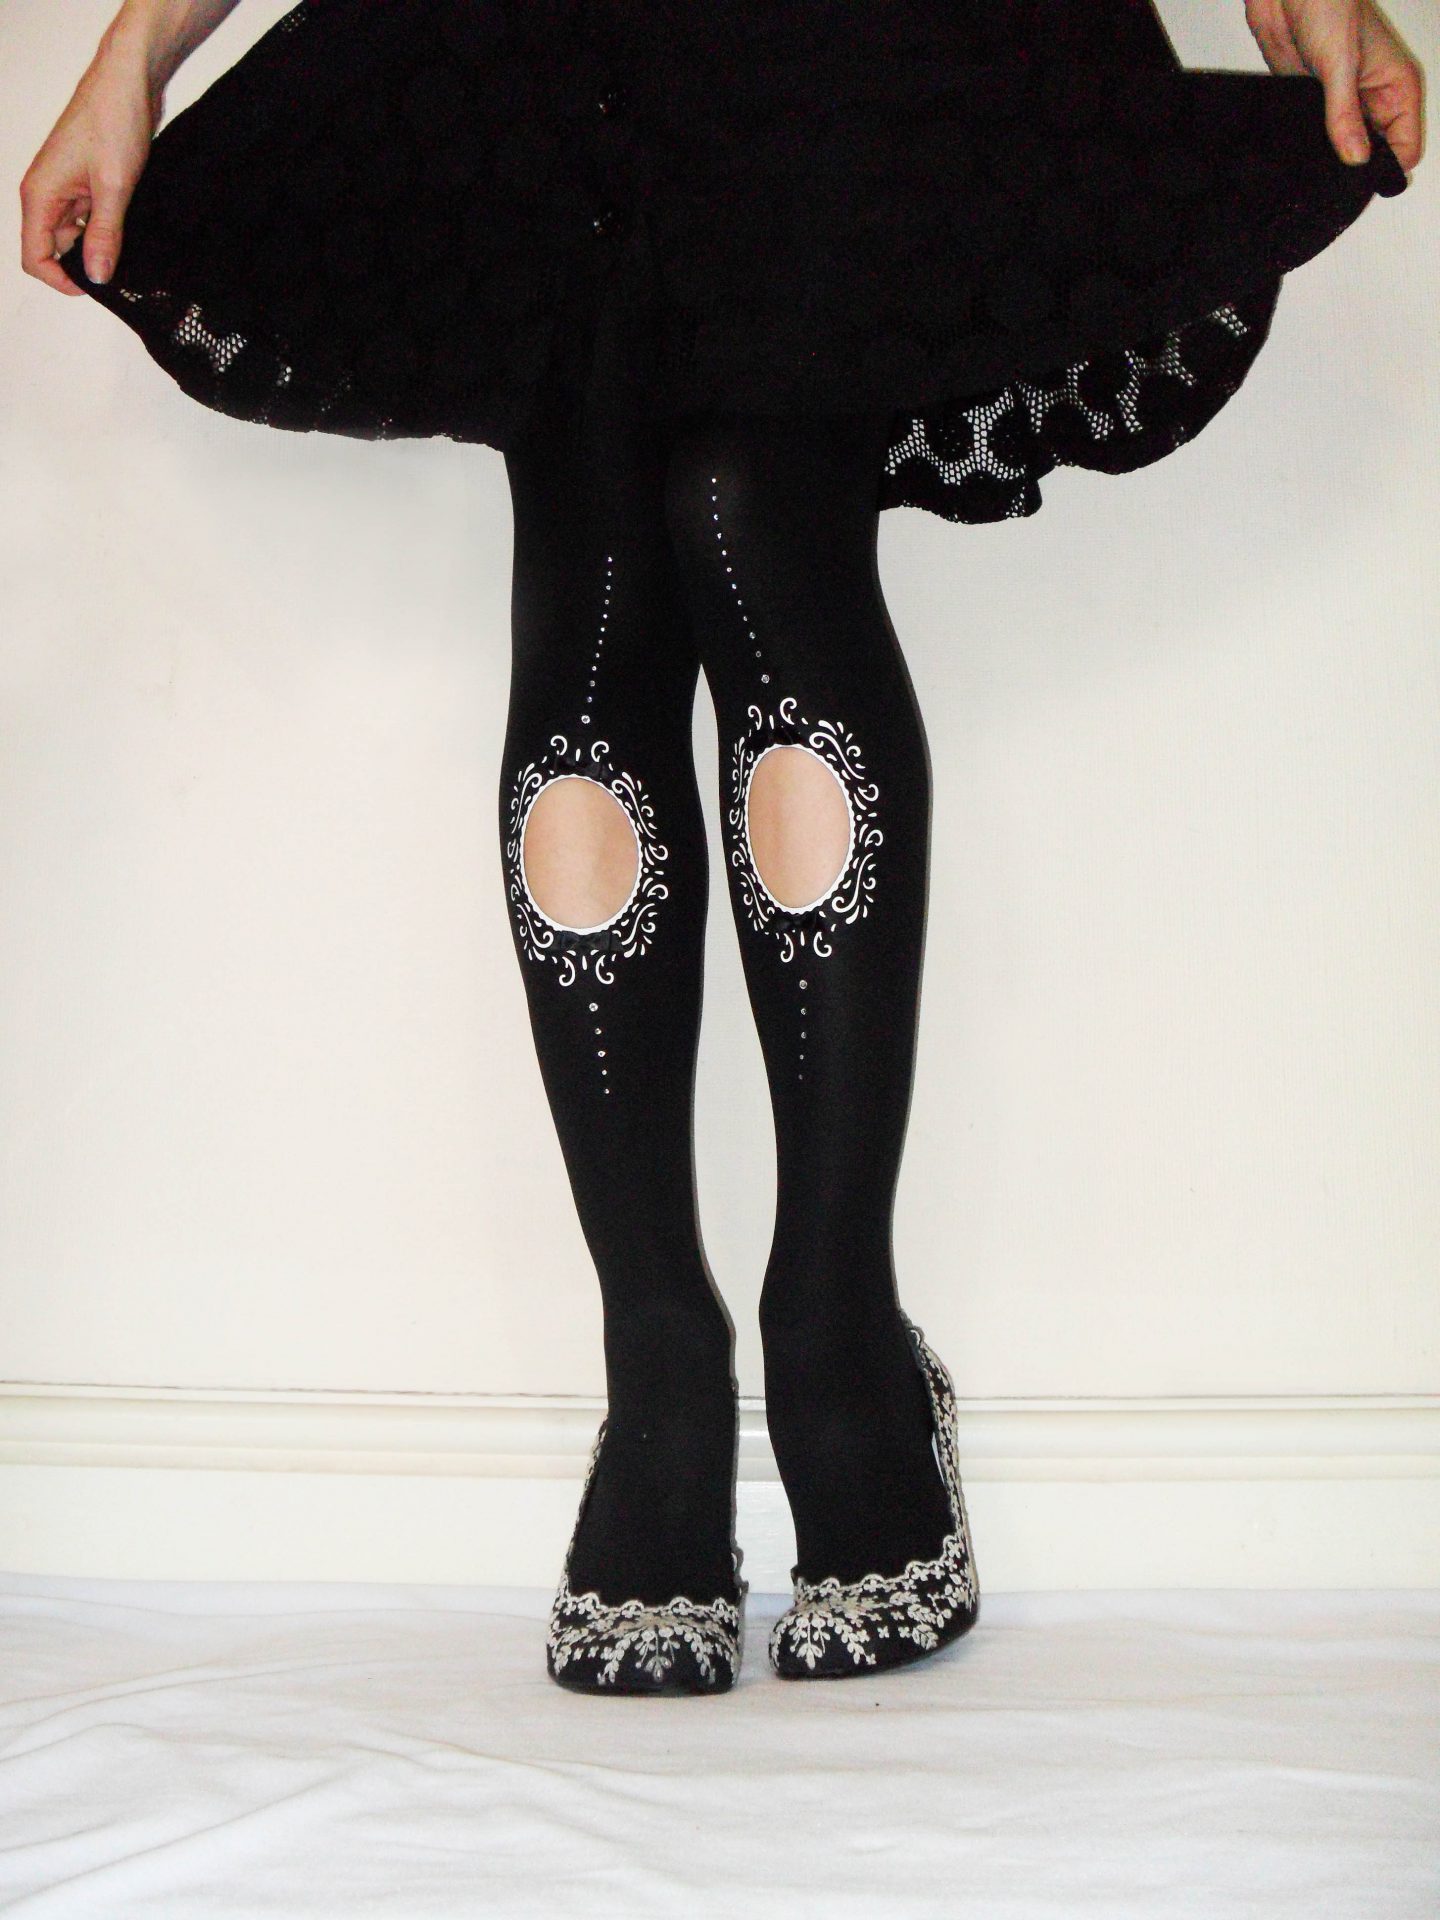 Girardi Chic Tulle Tights In Stock At UK Tights